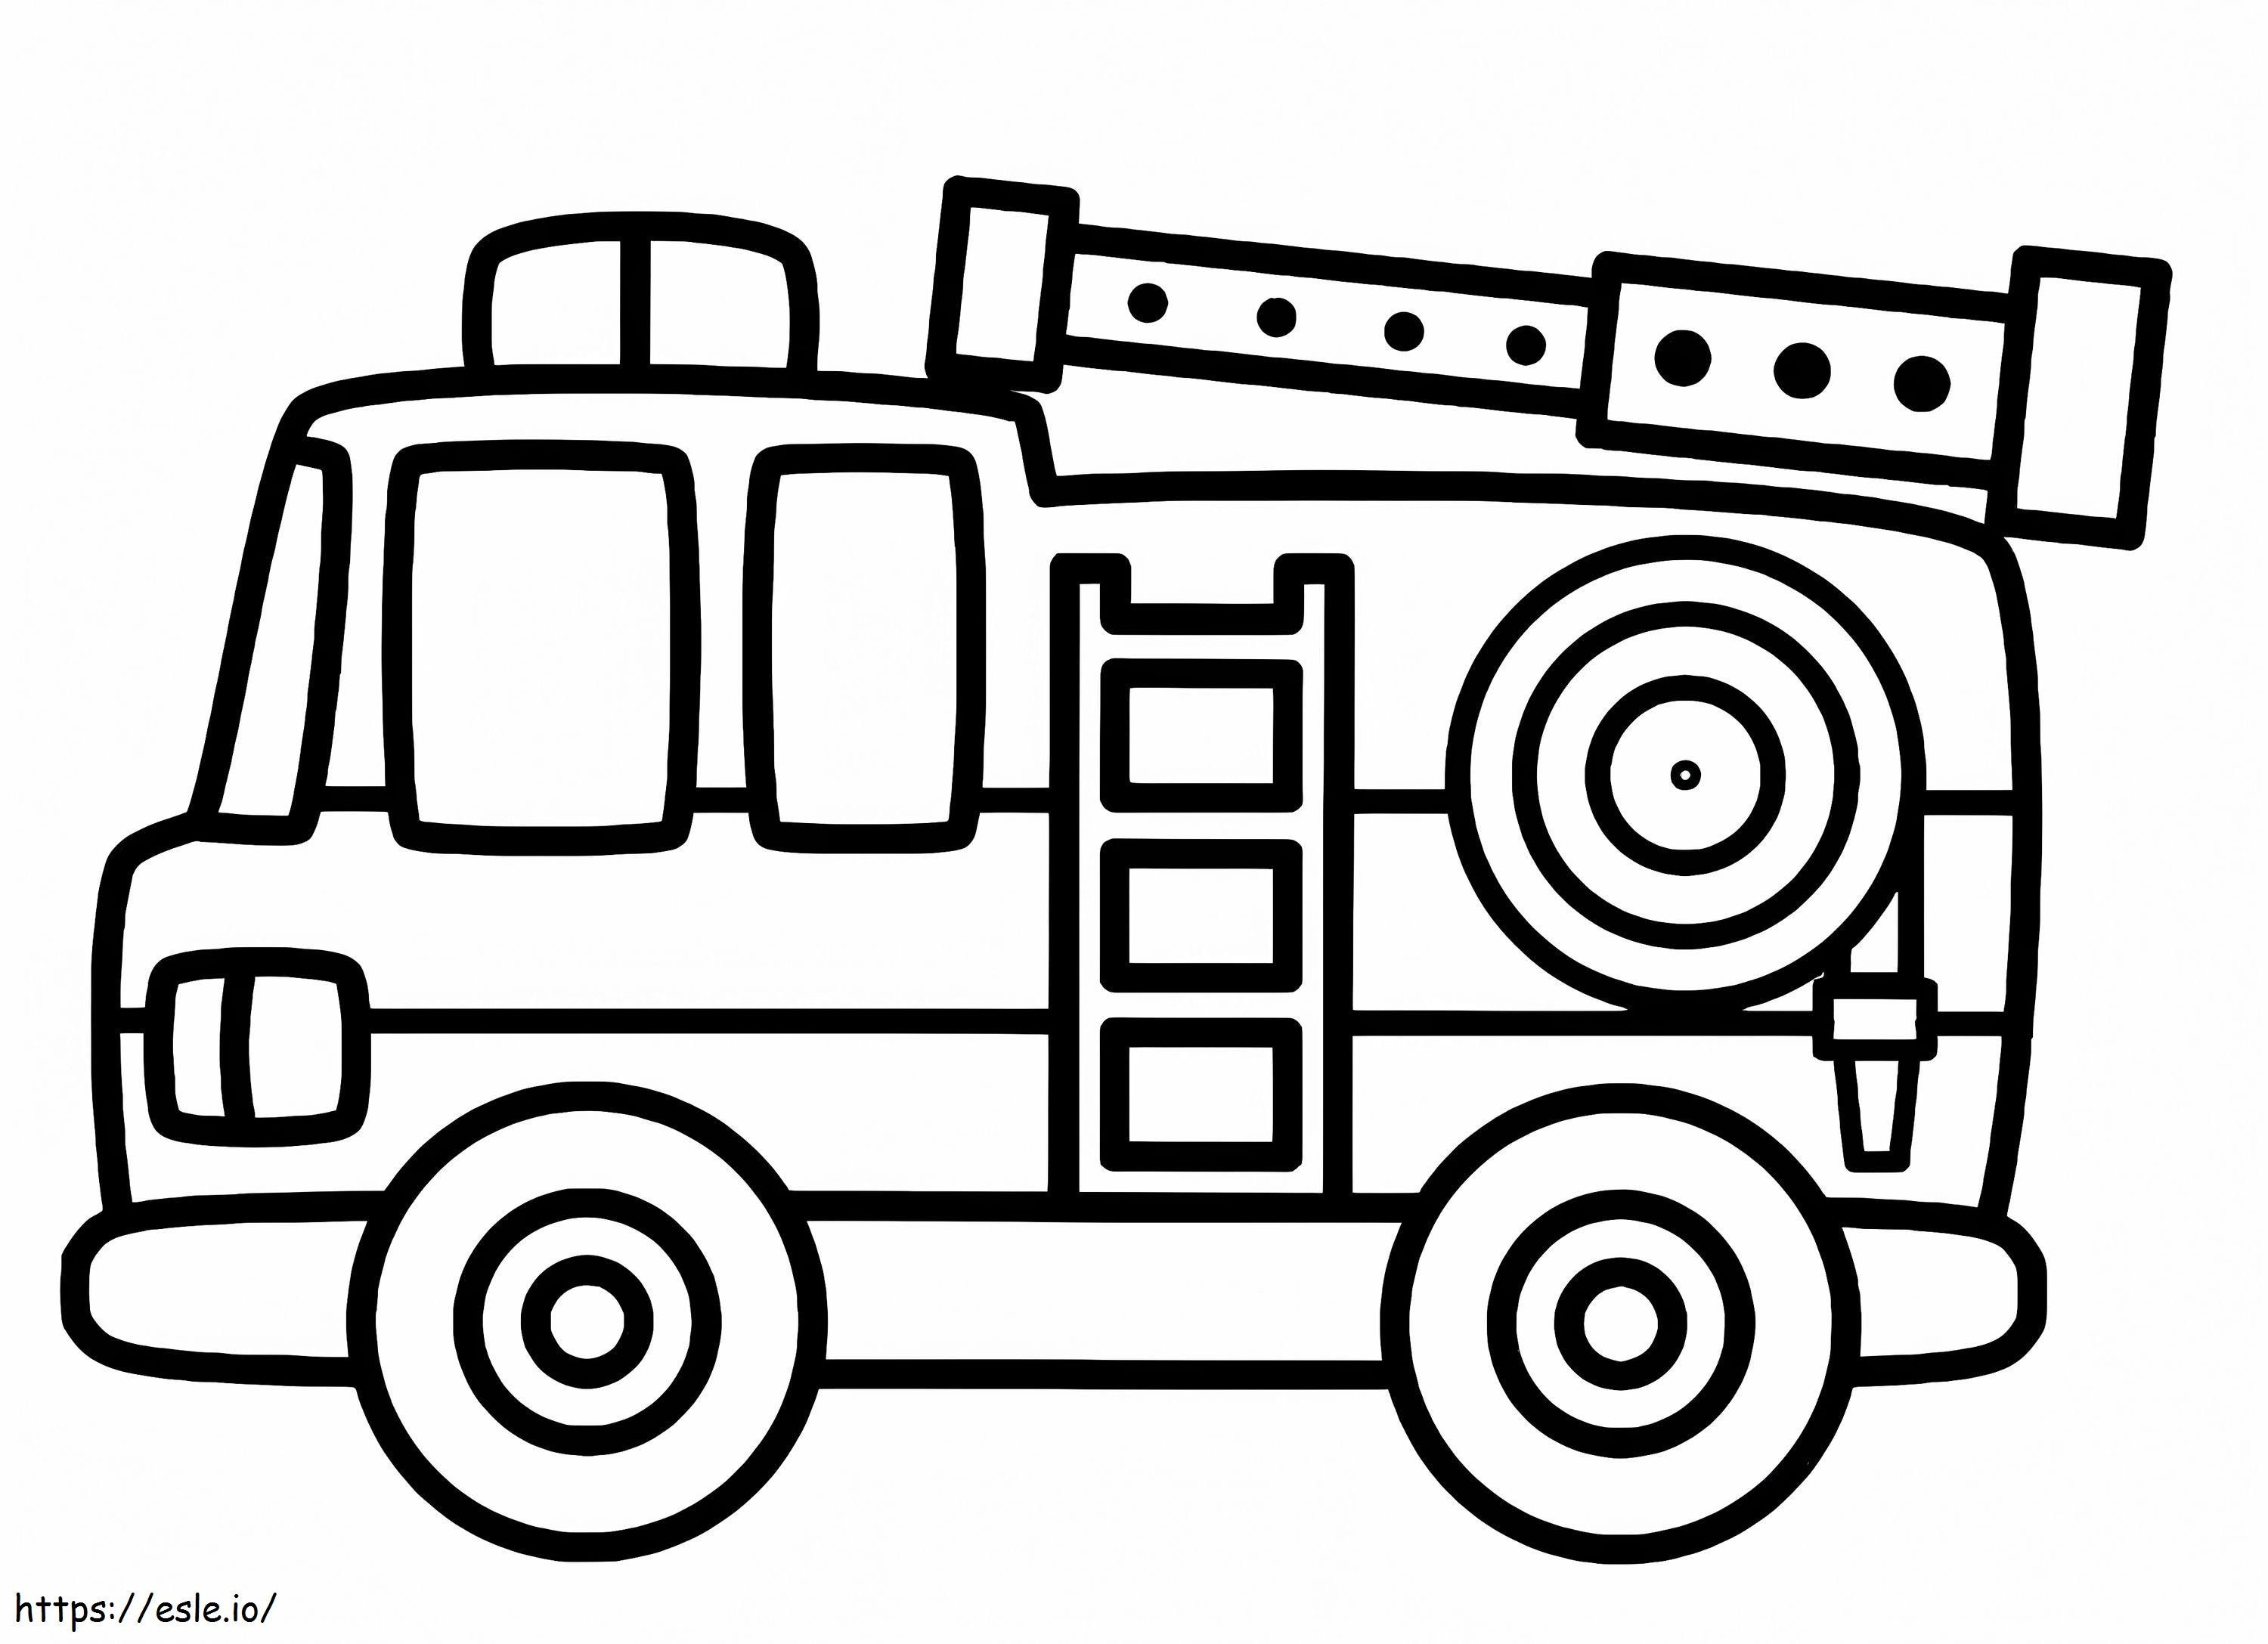 Simple Fire Truck 2 coloring page